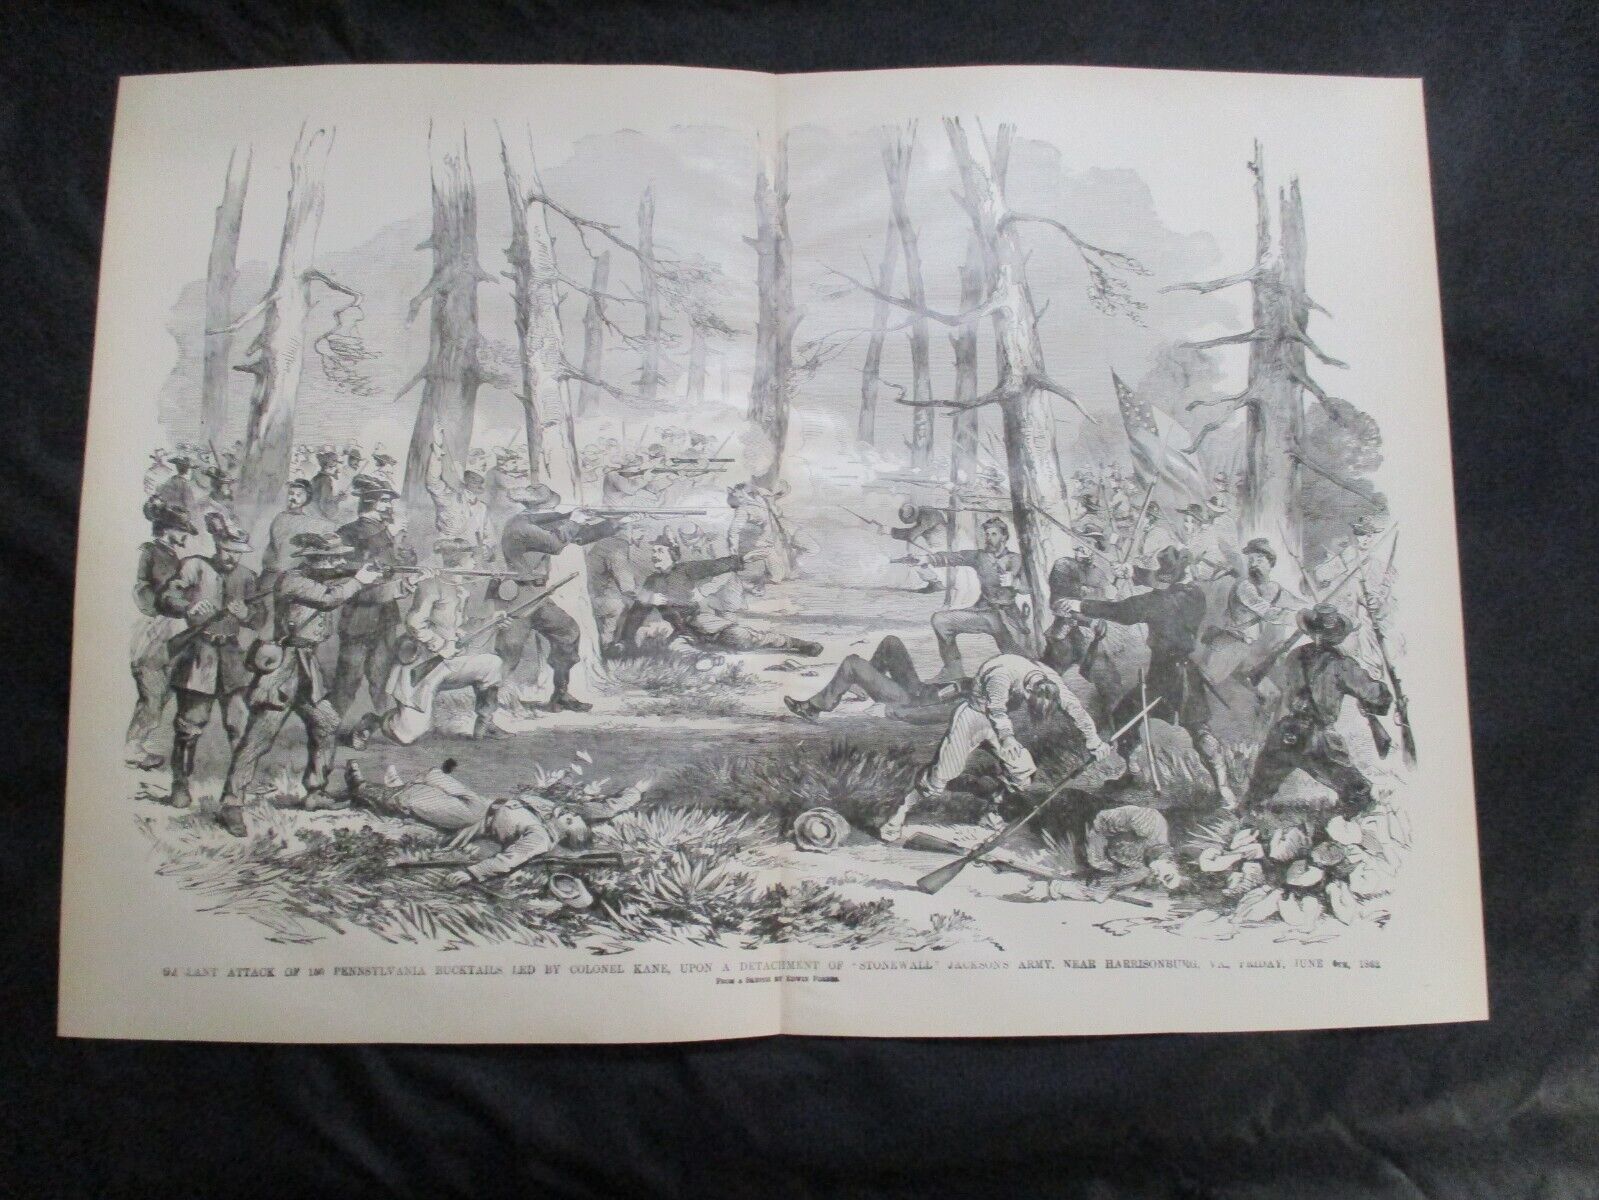 1885 Civil War Print - Stonewall Jackson's Army Attacked by Penn. Bucktails 1862